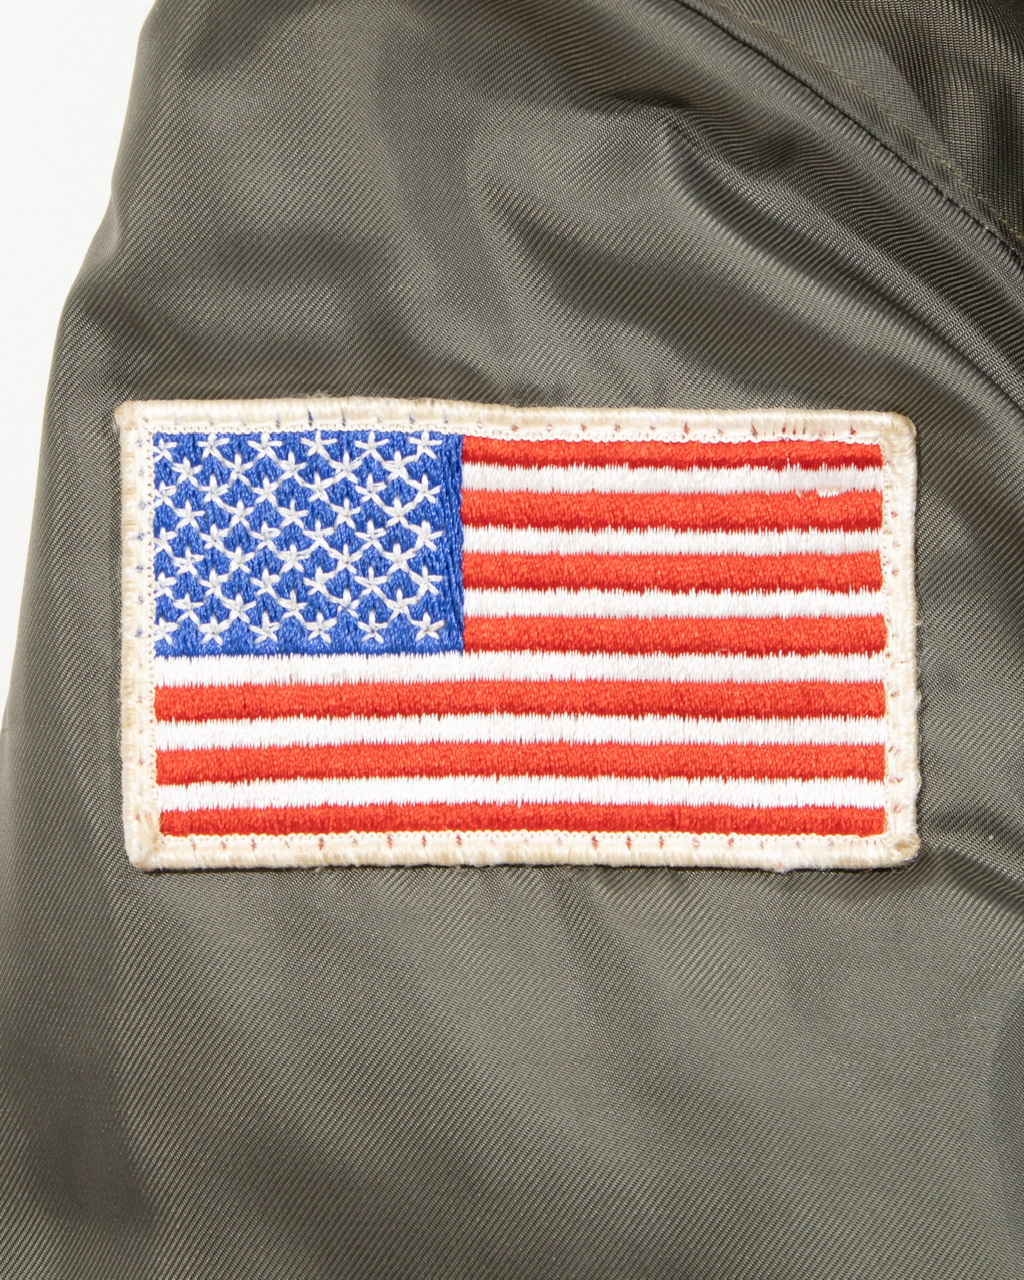 How to patch genuine USAF CWU-45/P | Vintage Leather Jackets Forum